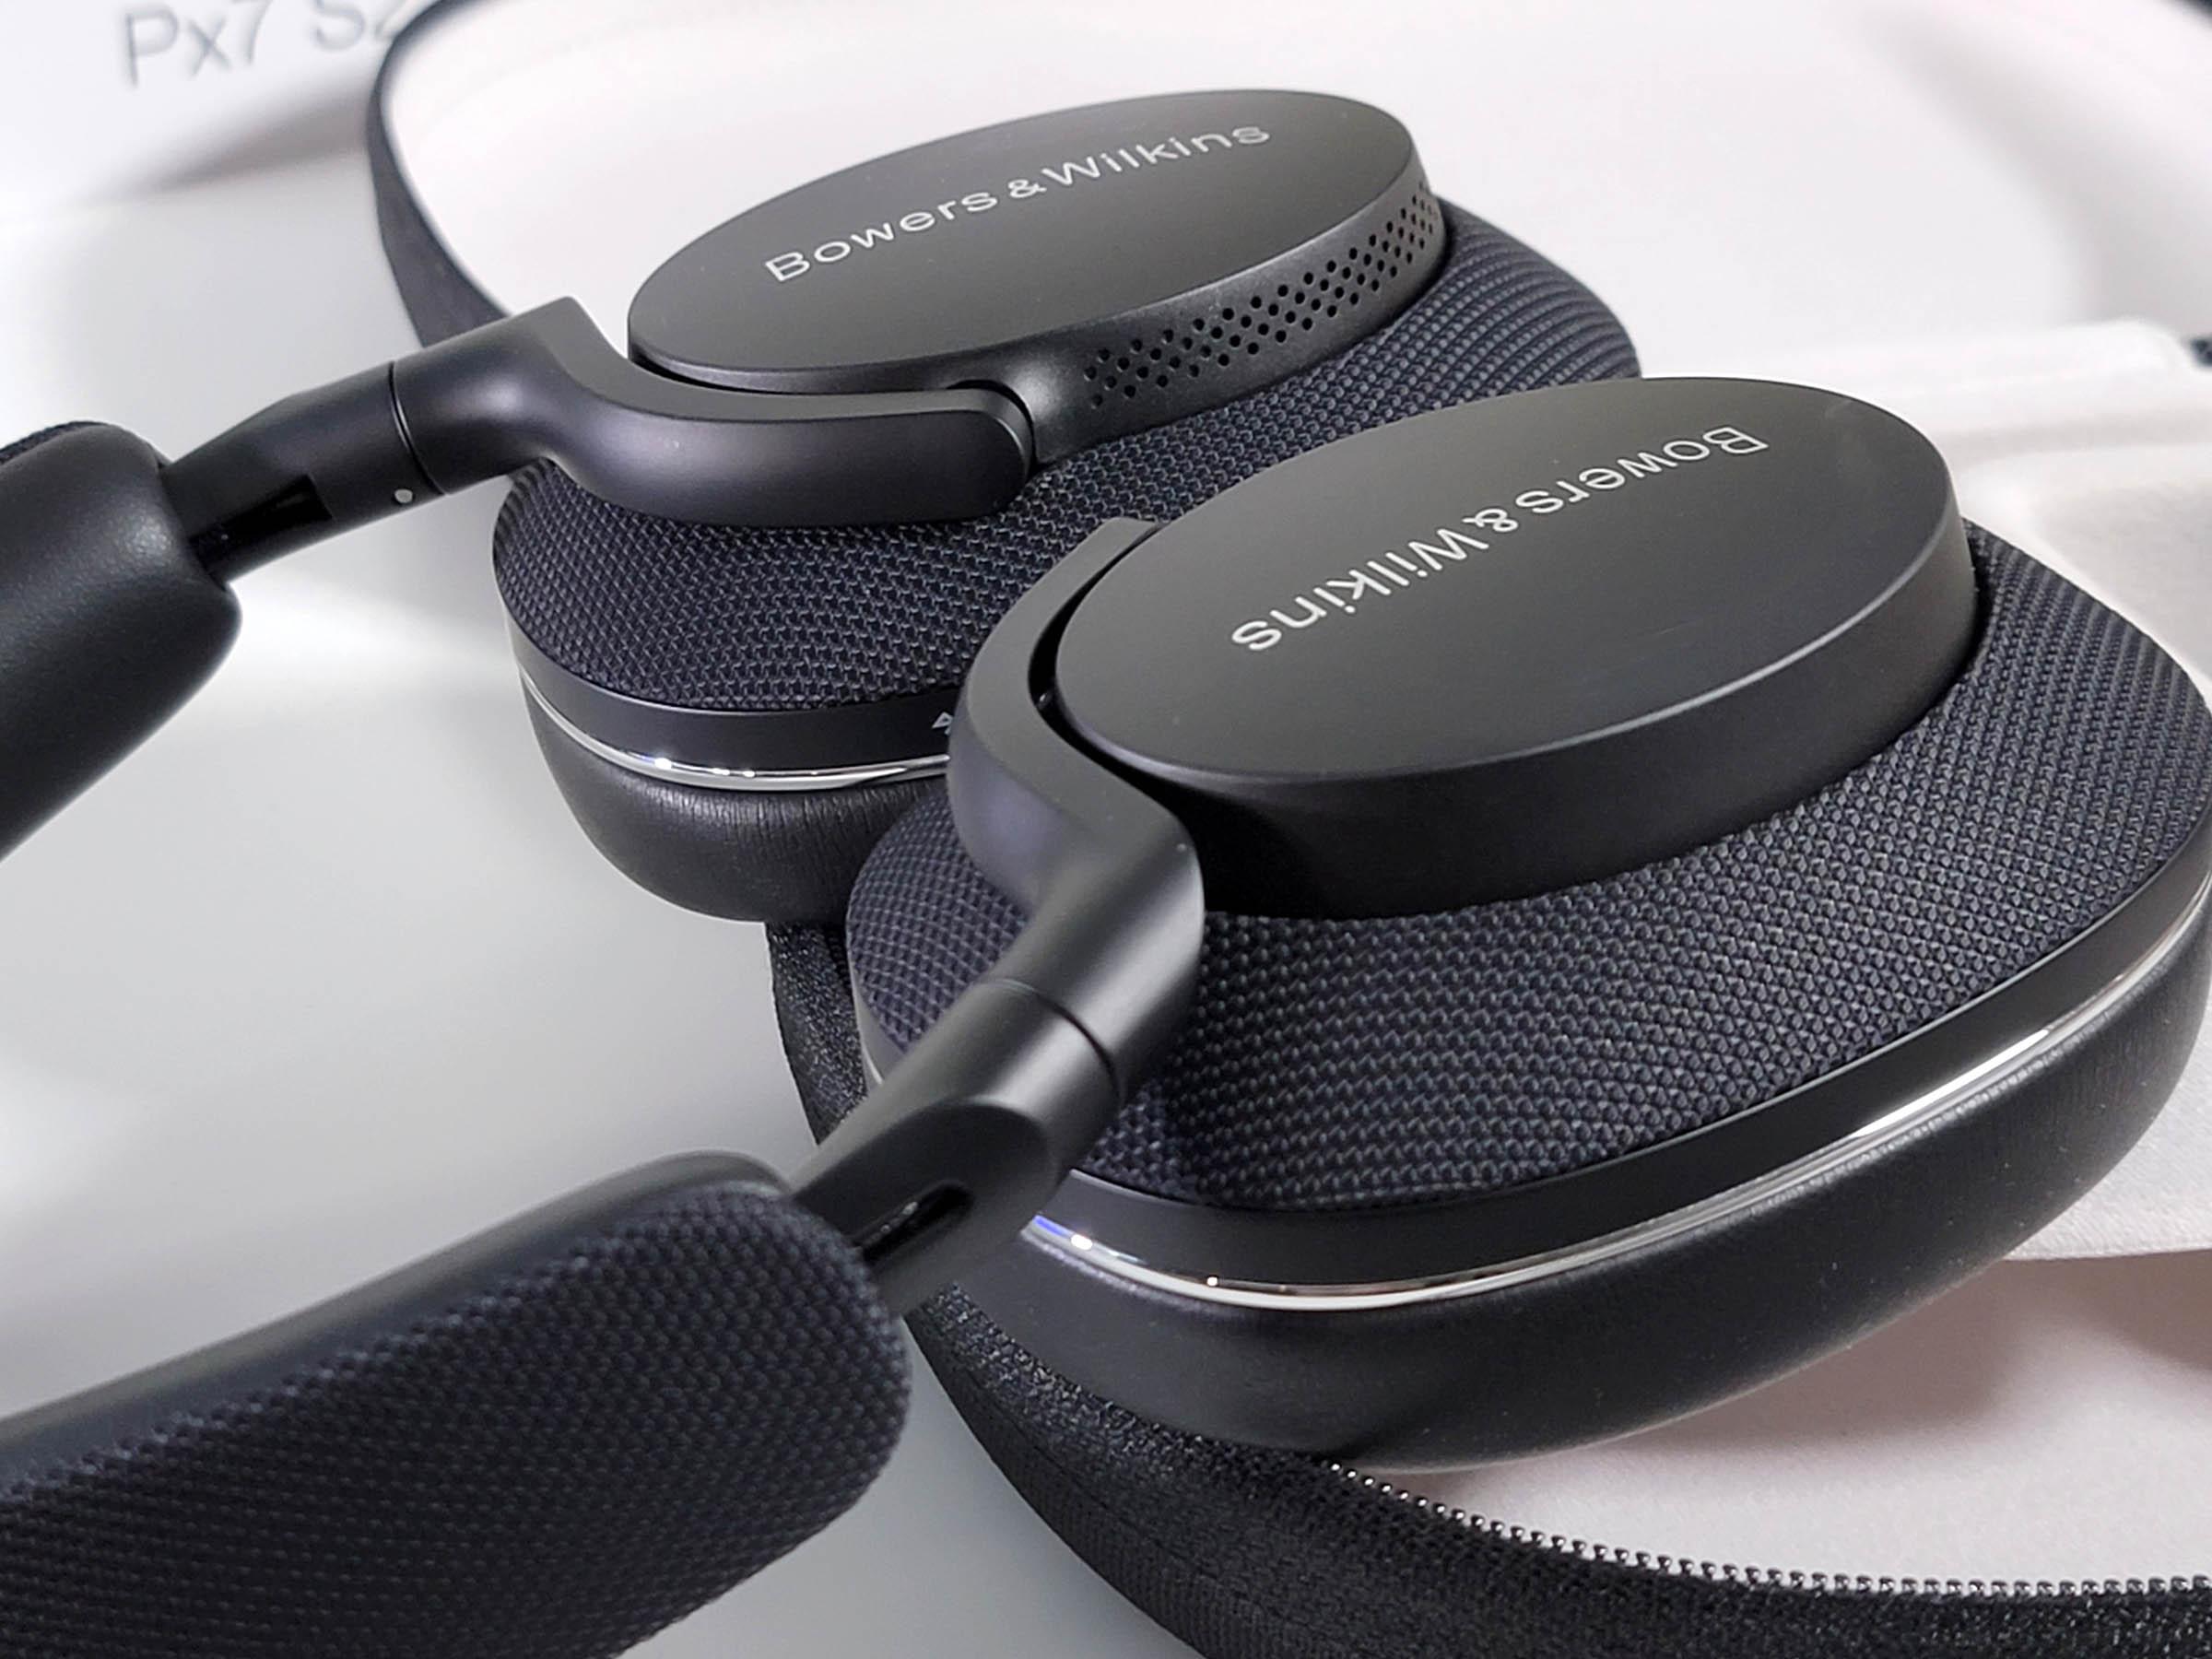 Bowers & Wilkins PX7 S2 vs PX7: What's the difference?